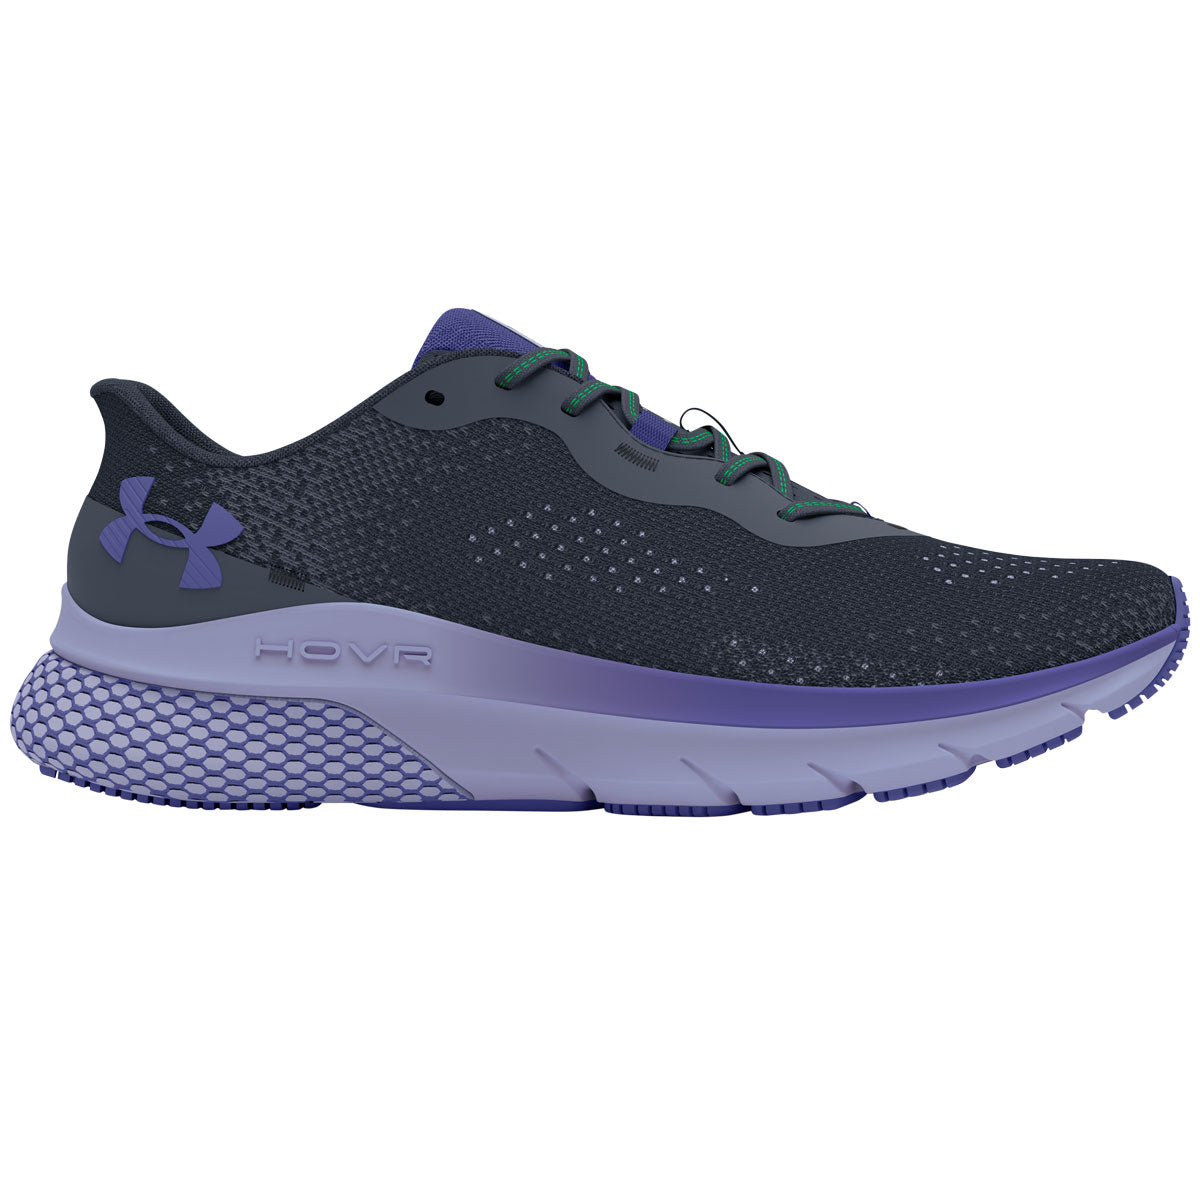 Under Armour Hovr Turbulence 2 Running Shoes - Womens - Downpour Grey/Celeste/Starlight